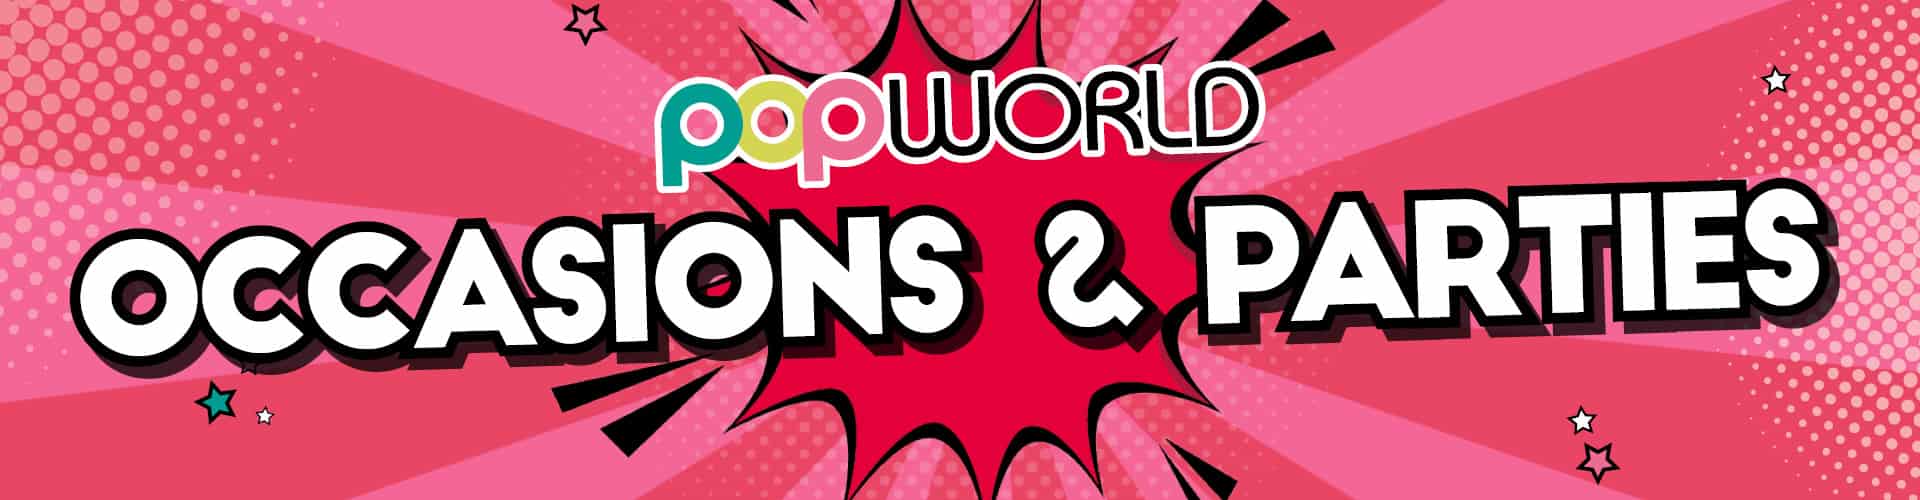 Occasions and Parties at Popworld London Watling Street